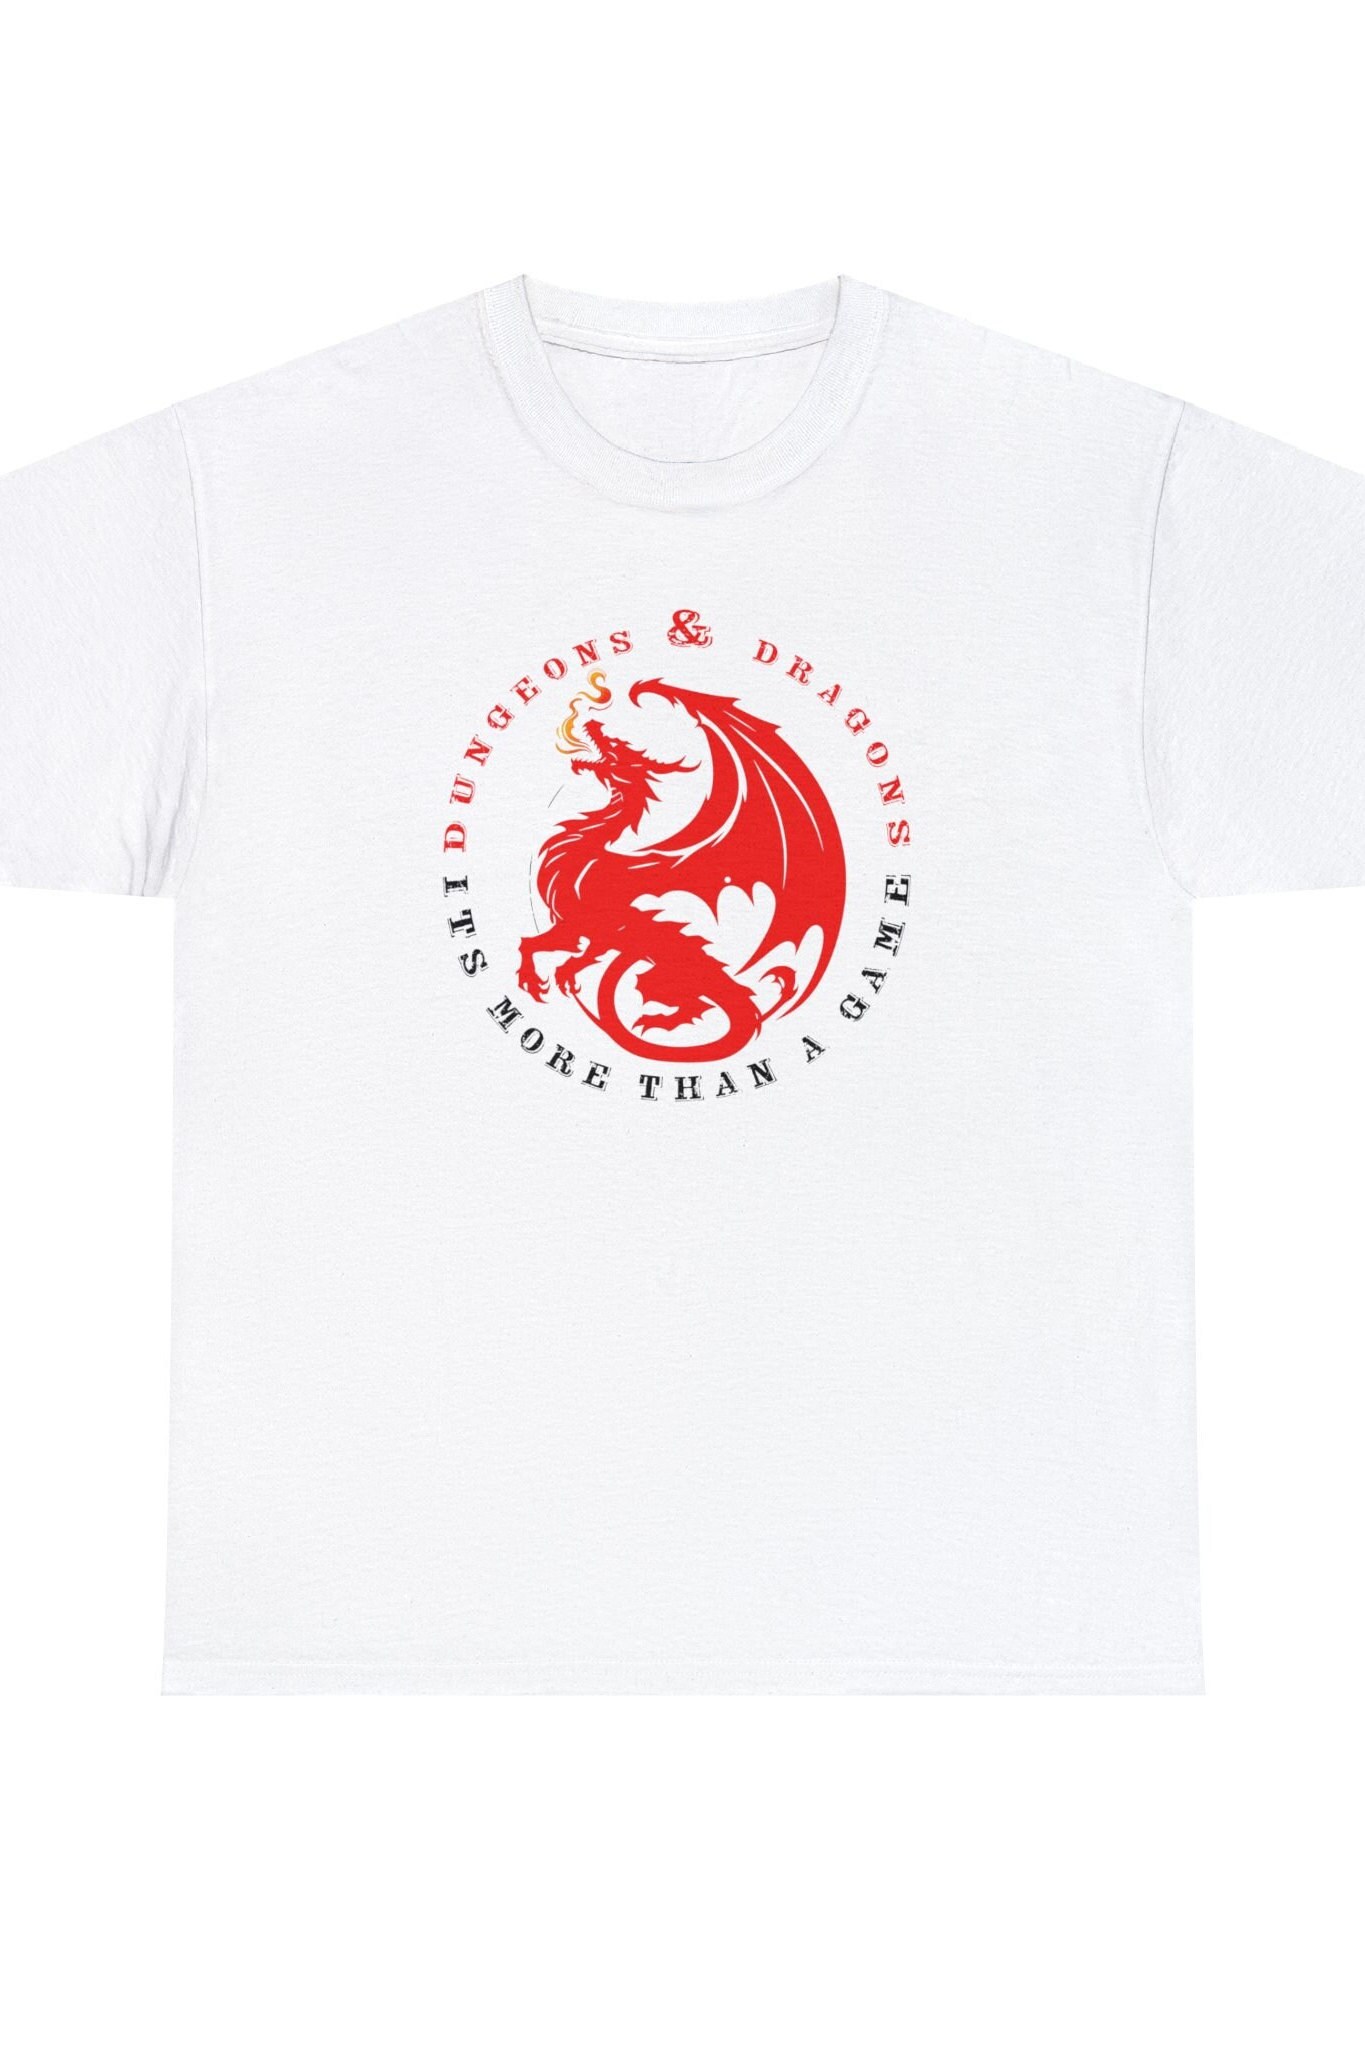 Its More Than a Game Dnd Shirt Dungeons and Dragons Tshirt Unisex Heavy ...